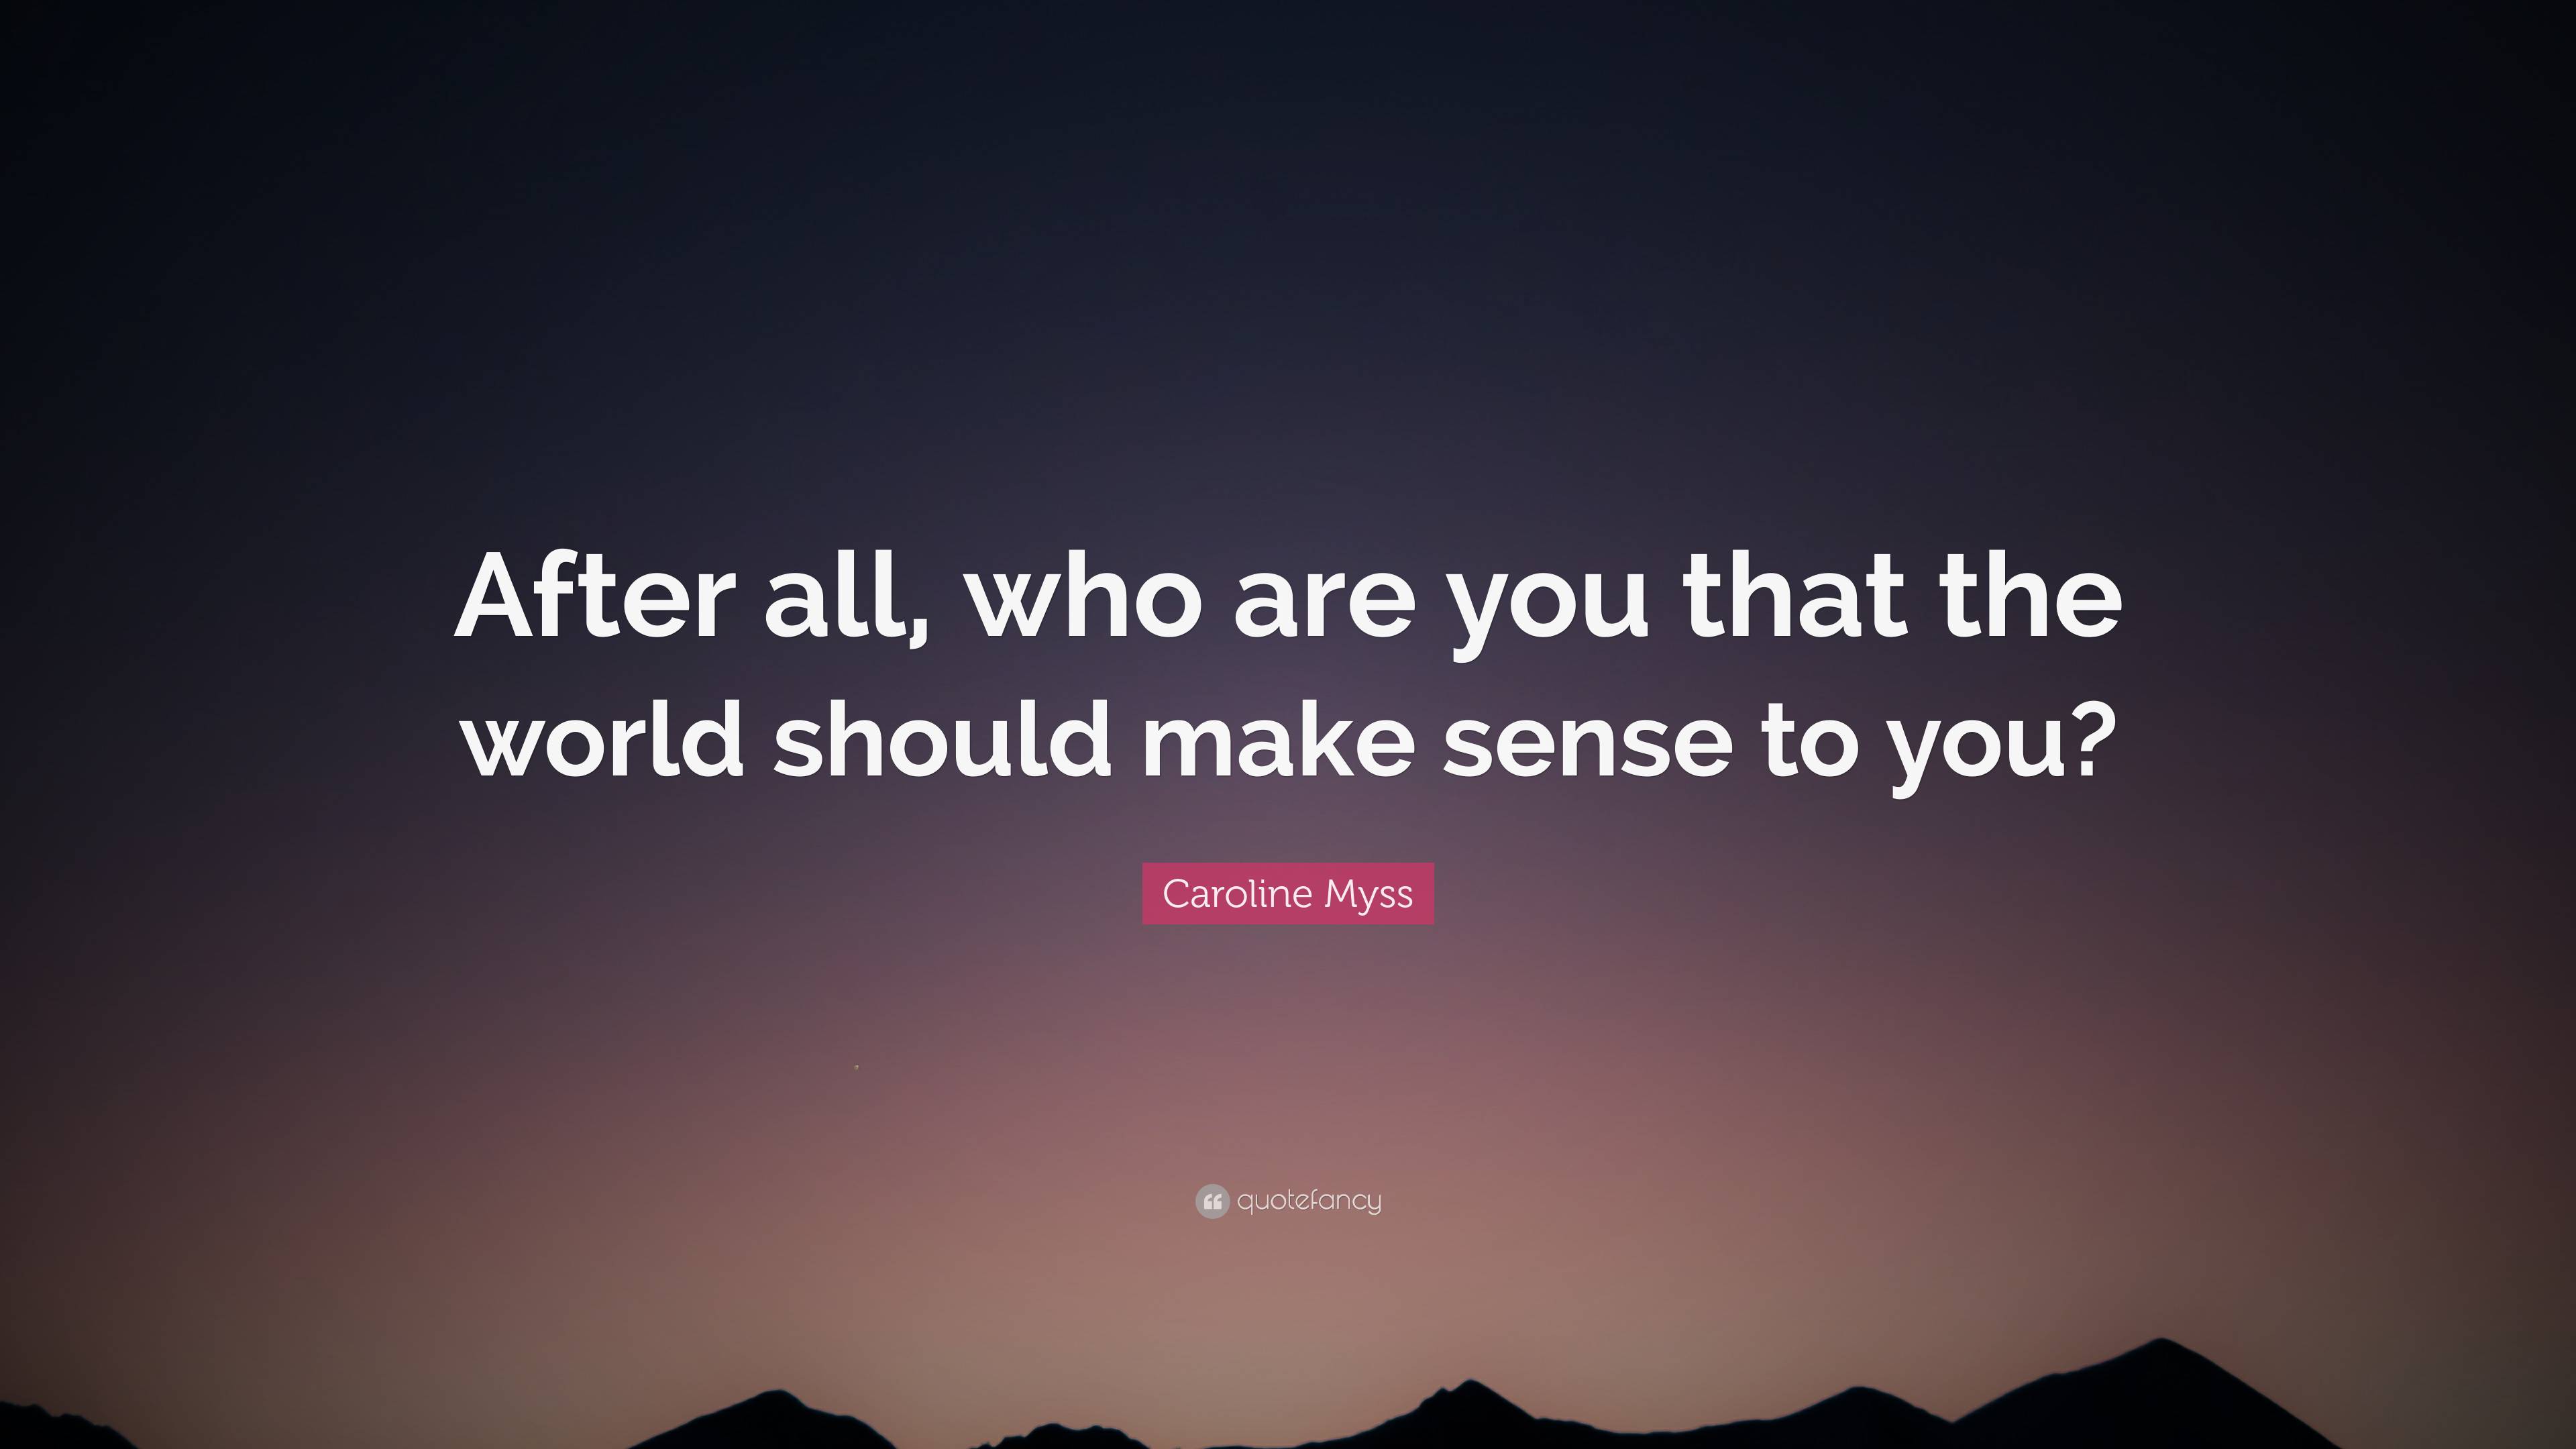 Caroline Myss Quote: “After all, who are you that the world should make ...